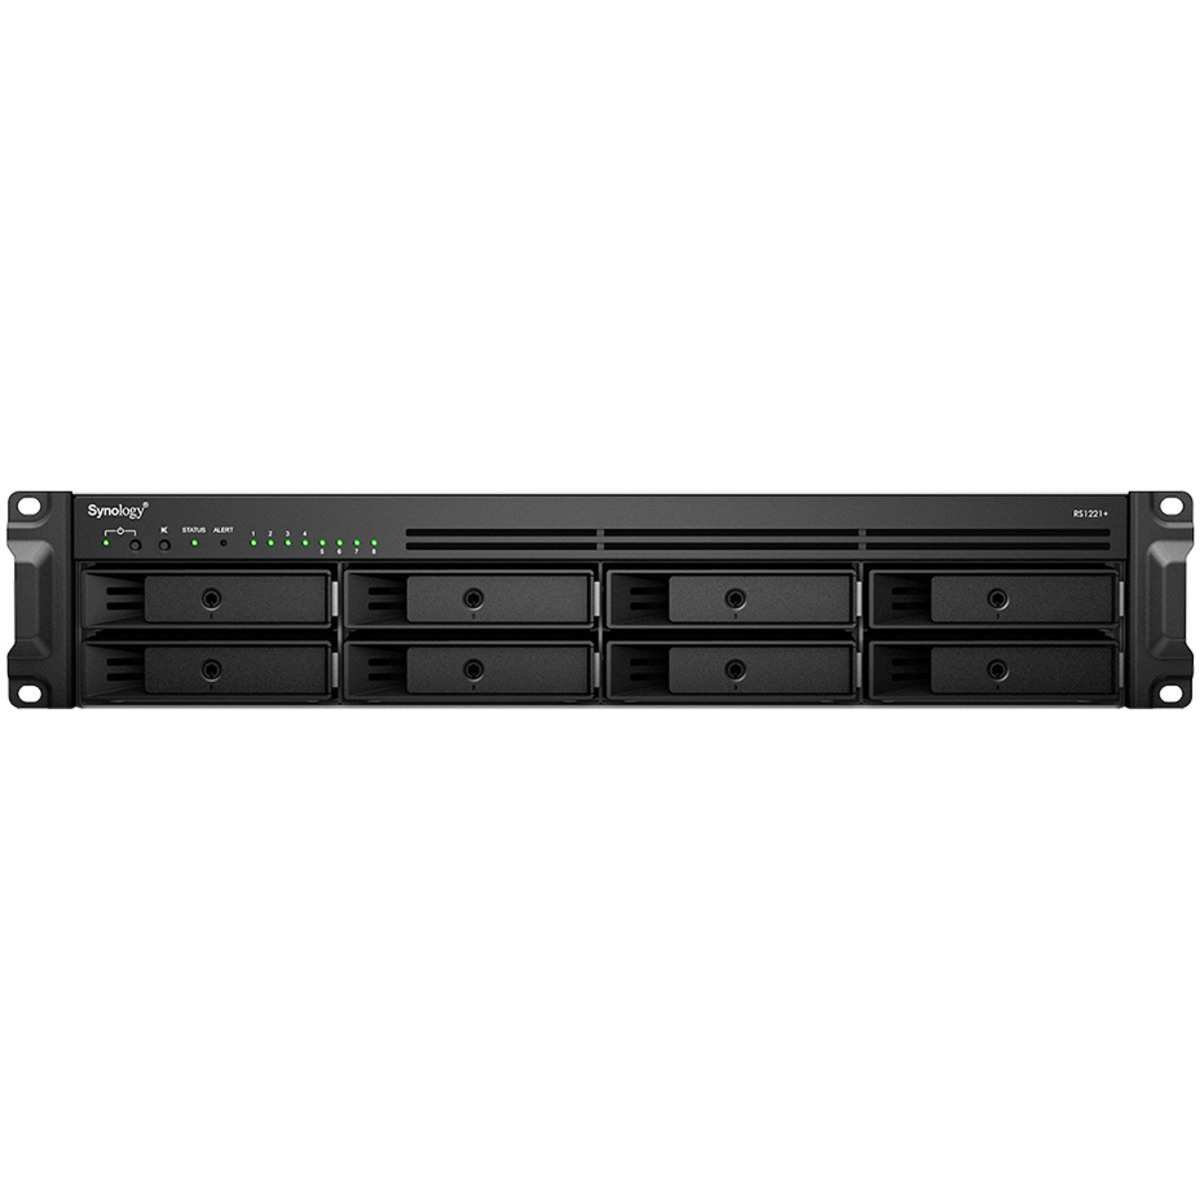 buy $9377 Synology RackStation RS1221RP+ 64tb RackMount NAS - Network Attached Storage Device 8x8000gb Samsung 870 QVO MZ-77Q8T0 2.5 SATA 6Gb/s SSD CONSUMER Class Drives Installed - Burn-In Tested - nas headquarters buy network attached storage server device das new raid-5 free shipping usa christmas new year holiday sale RackStation RS1221RP+